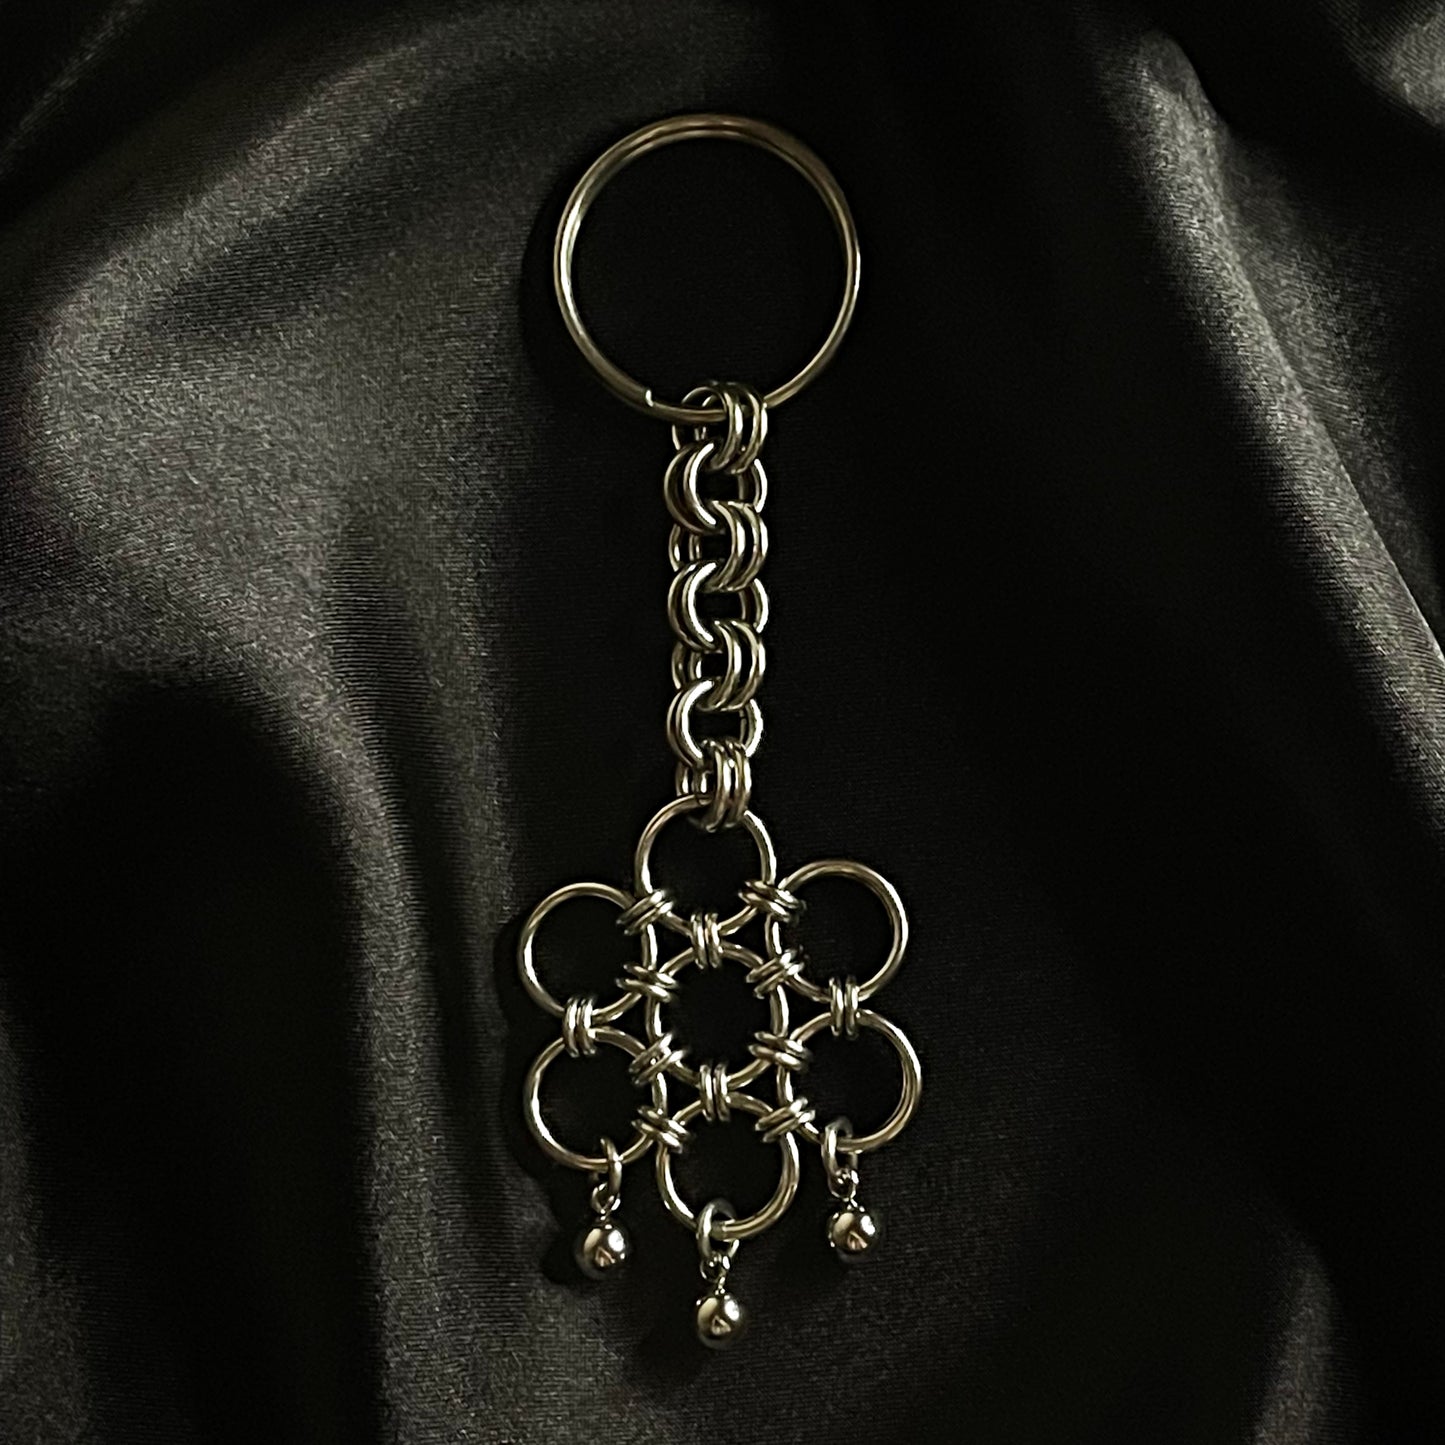 the ball in bloom keychain